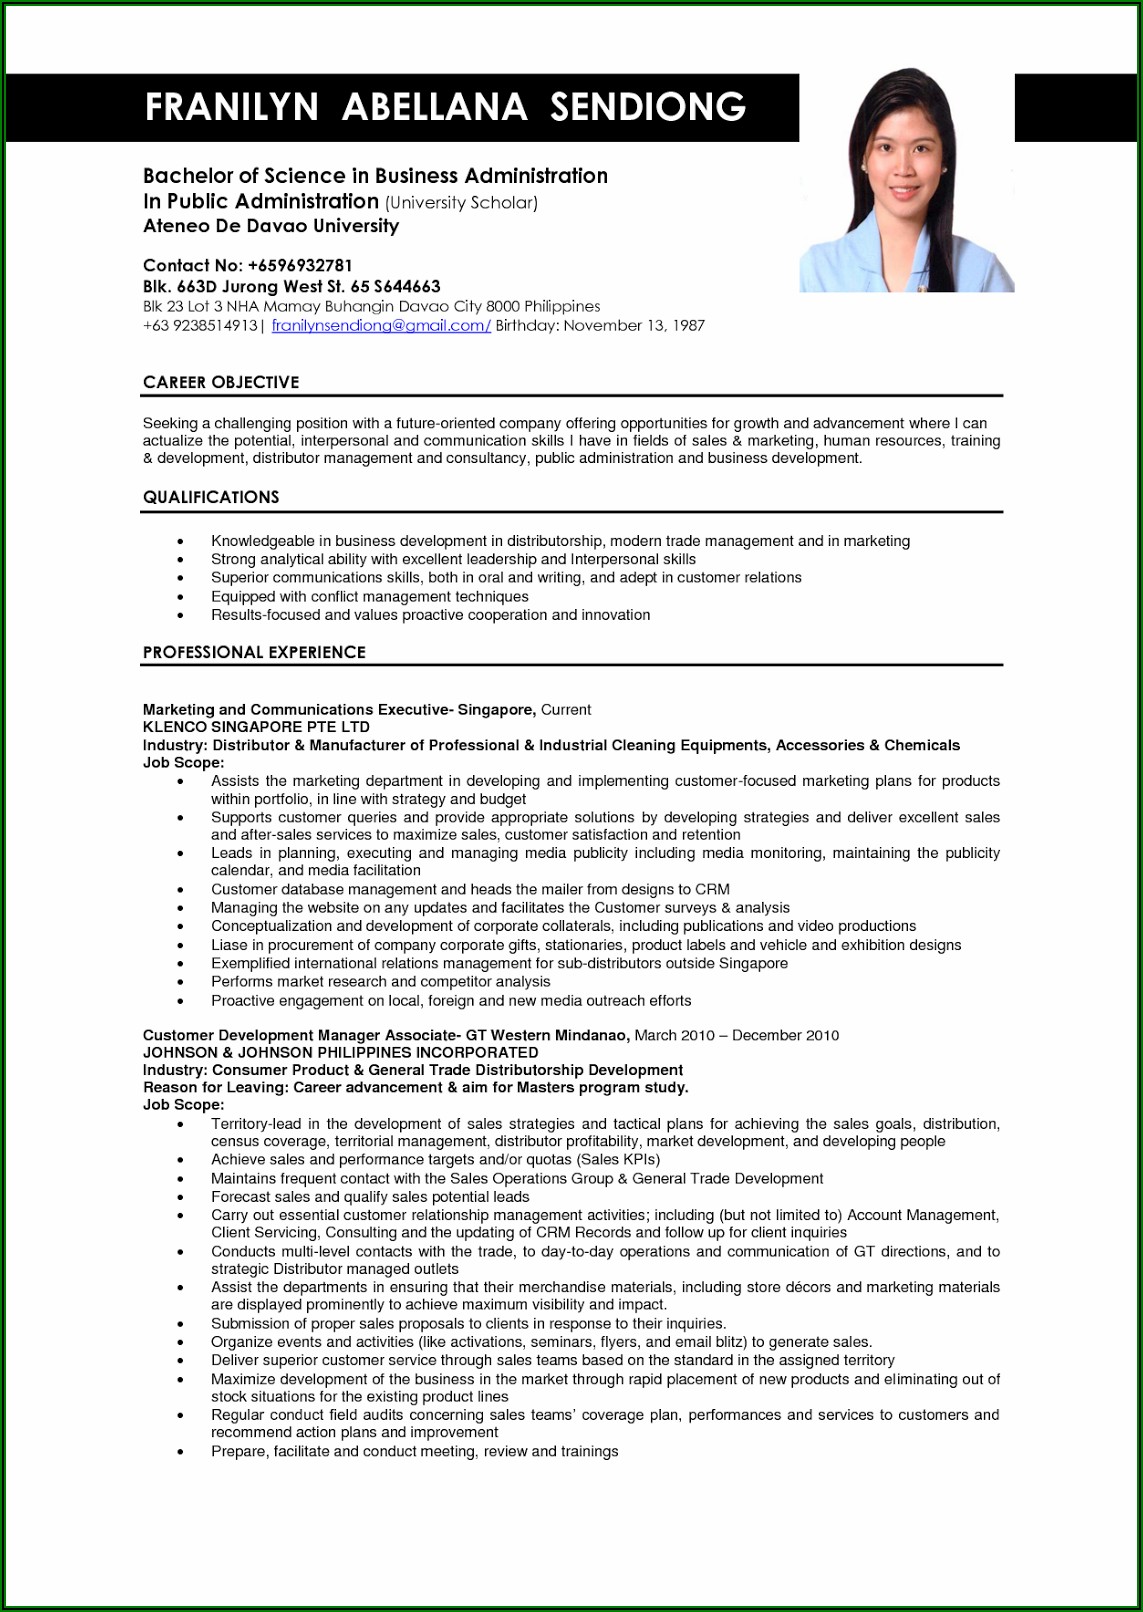 Sample Resume Format For Fresh Graduates Of Business Administration